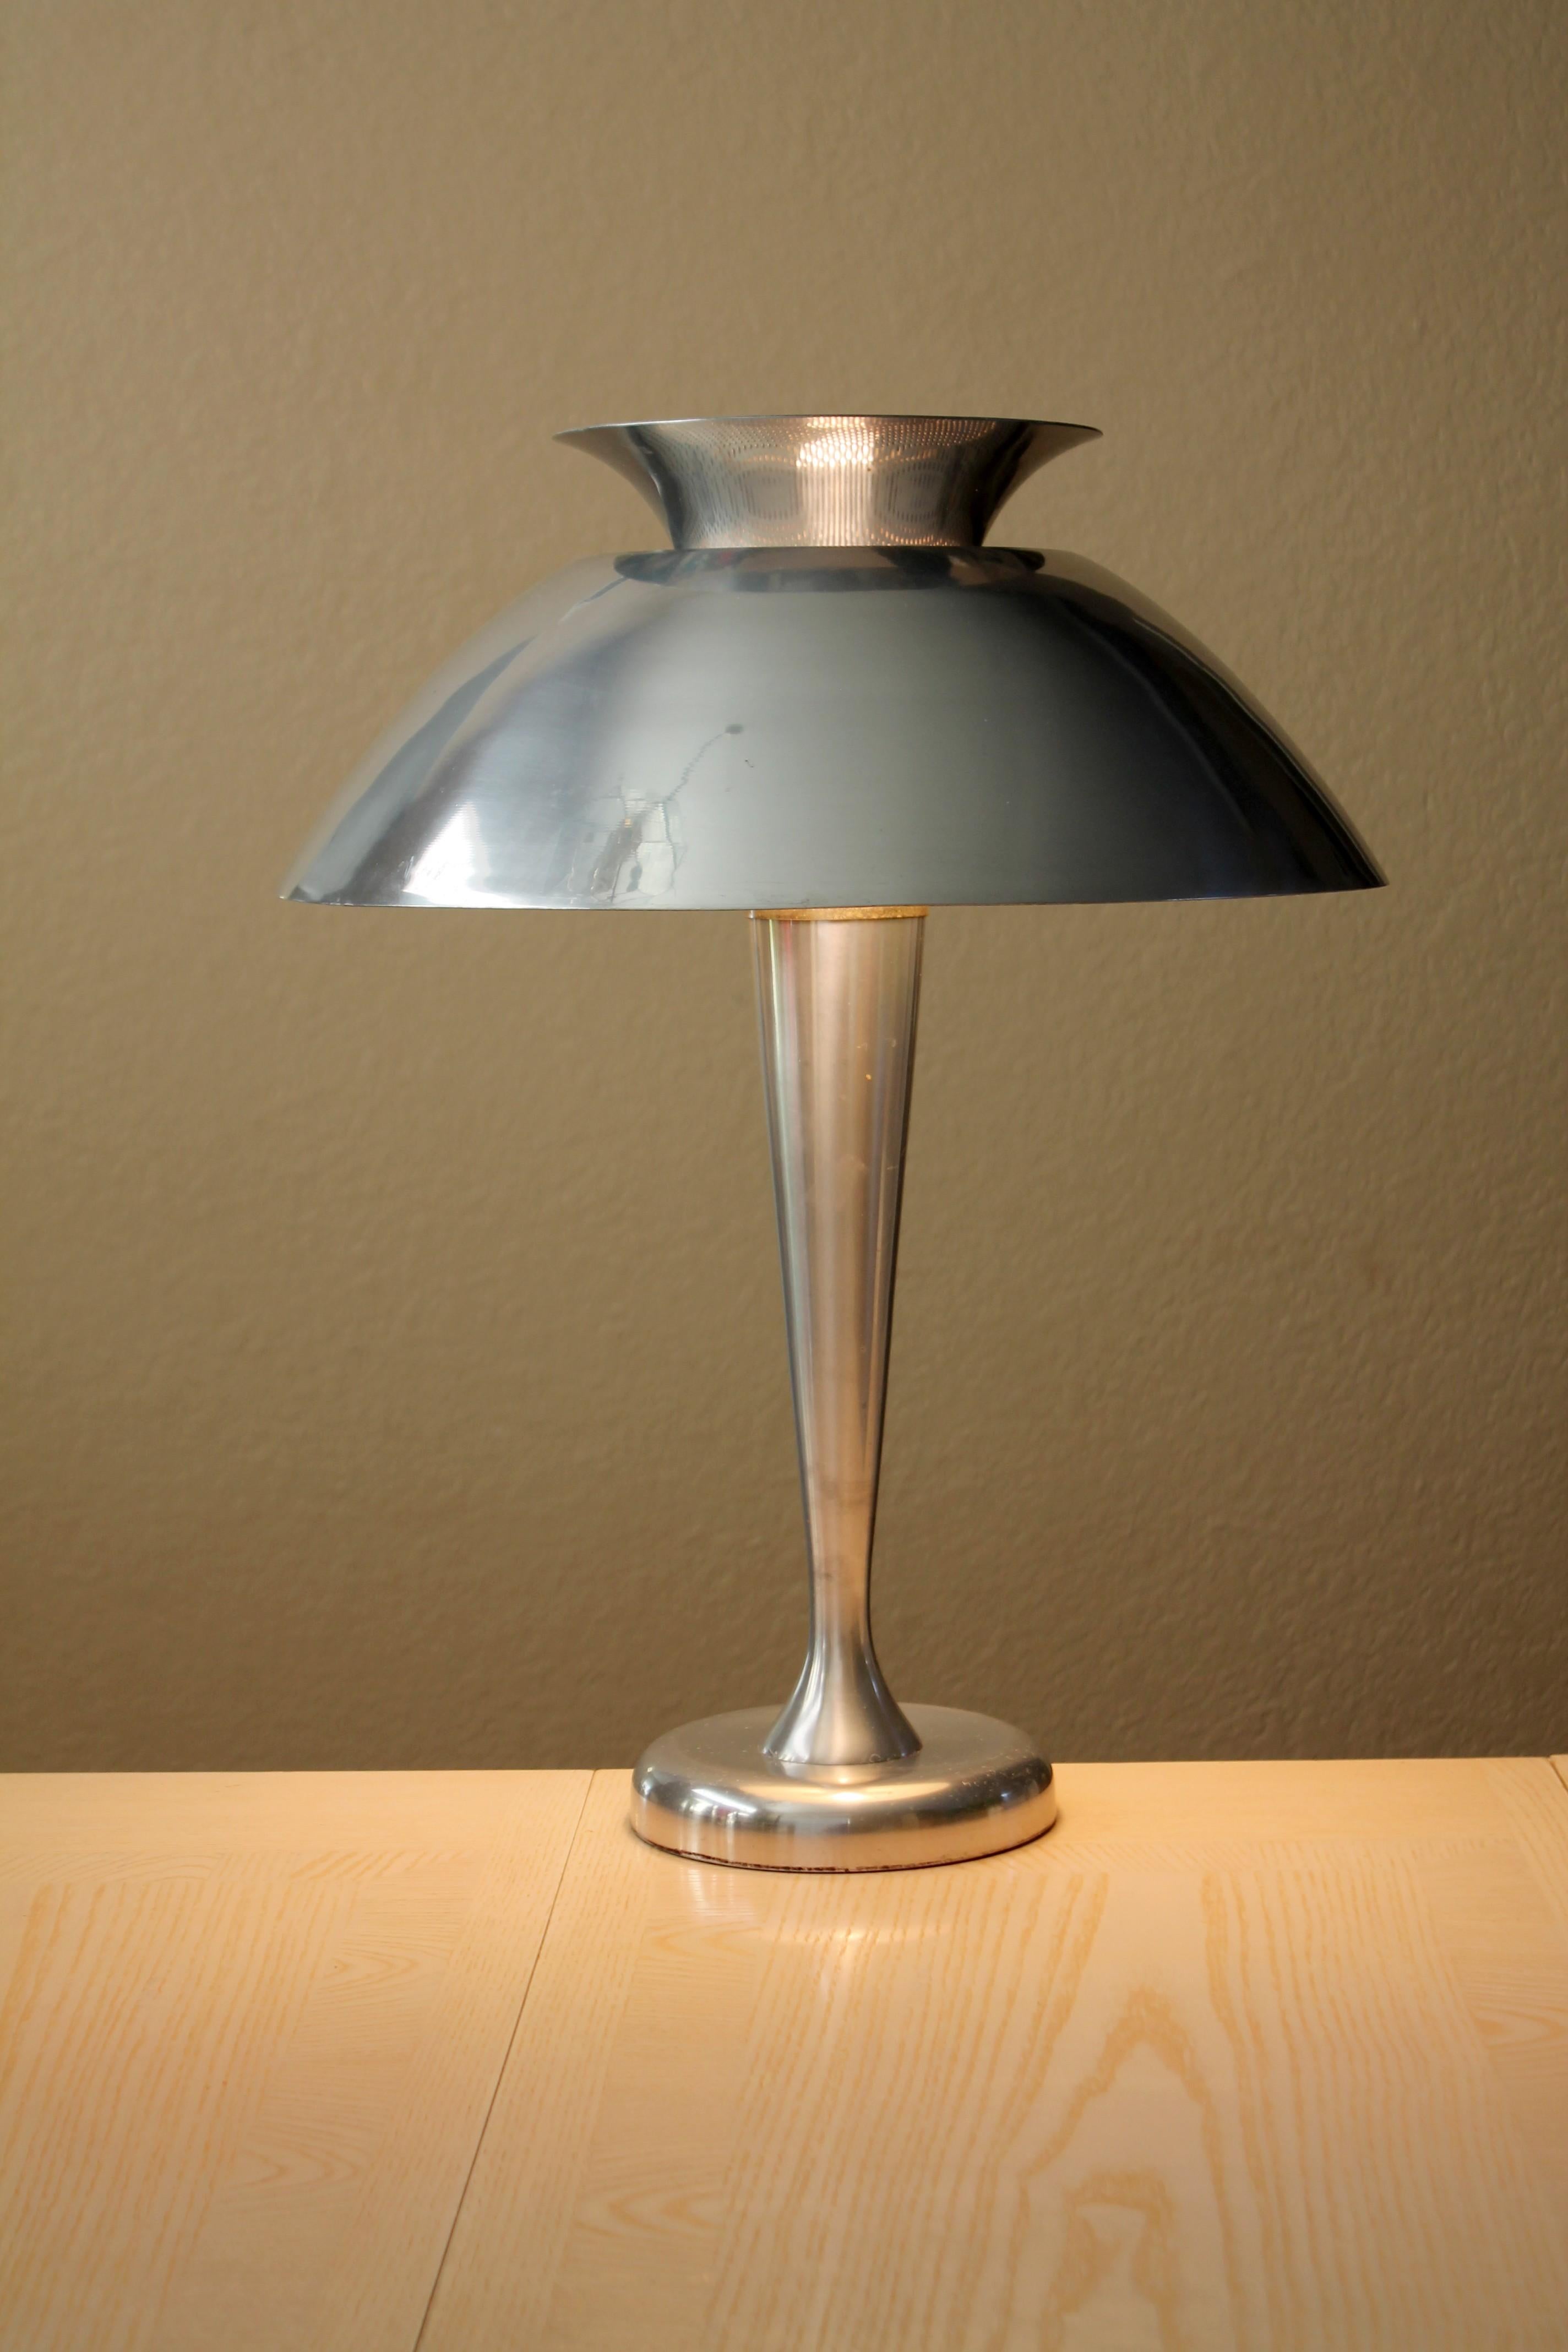  
ONE OF THE MOST BEAUTIFUL 
ALUMINUM LAMPS IN THE WORLD!

BAUHAUS/ ART DECO STYLE!

AFTER POUL HENNINGSEN PH5

ALUMINUM REFLECTOR SHADE
LIGHT DIFFUSING STYLE
TABLE/DESK LAMP!
 
(APPROX. 19.5